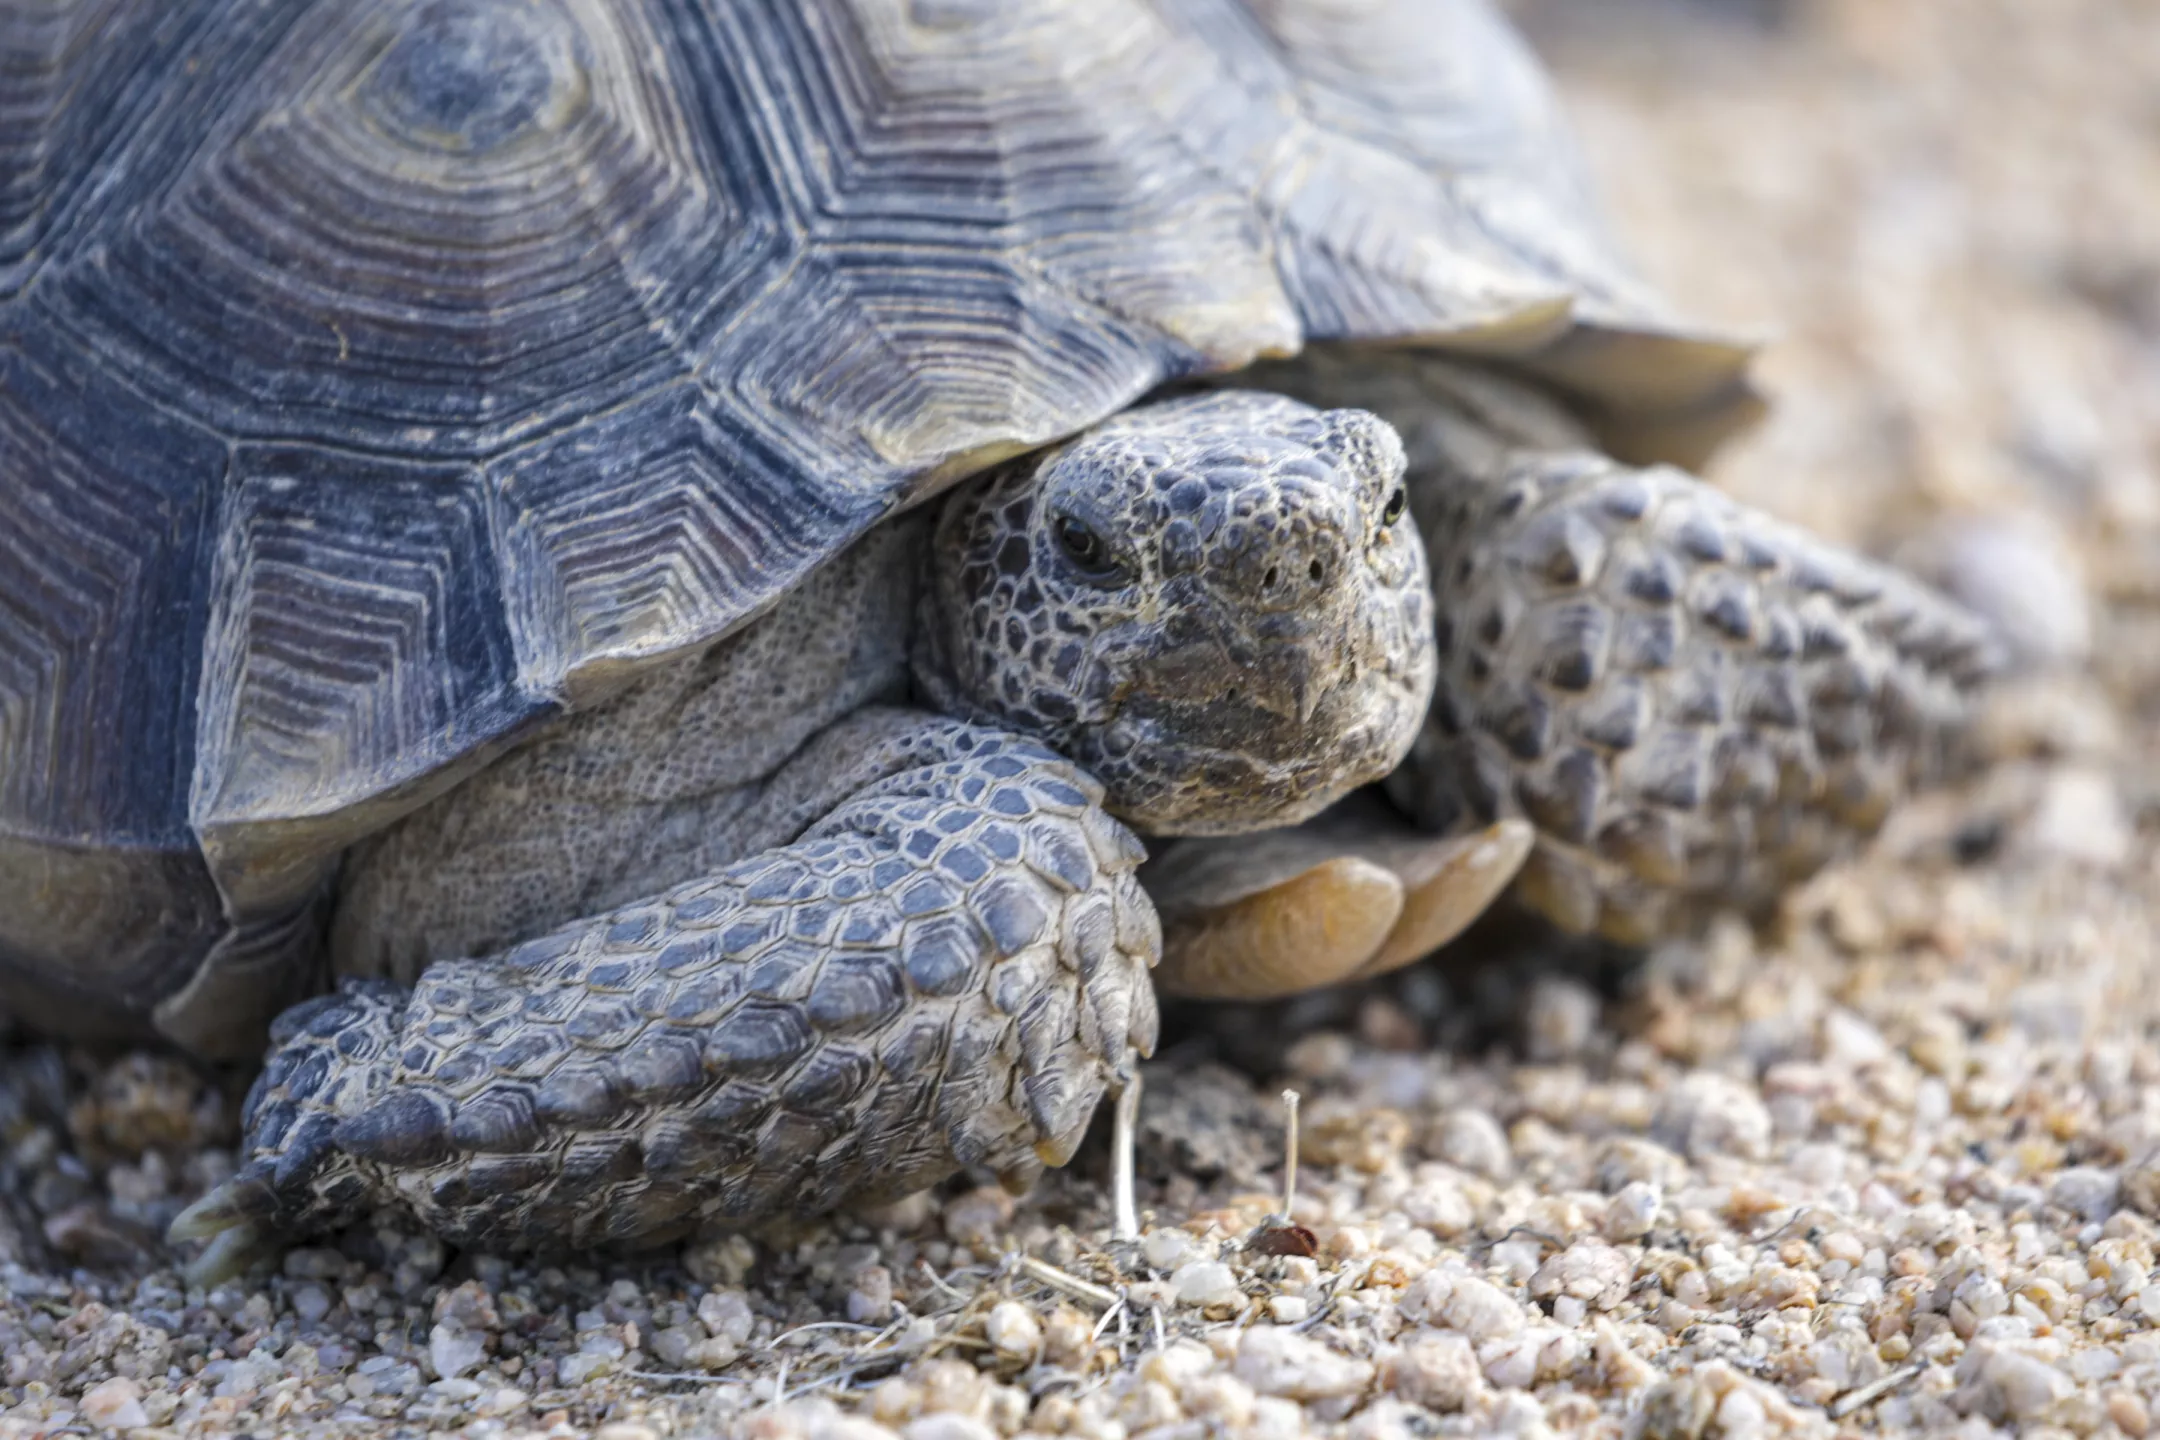 A desert tortoise crawls along the sands of the Desert Tortoise Research Natural Area in California City in 2022. Photo: Irfan Khan / Los Angeles Times